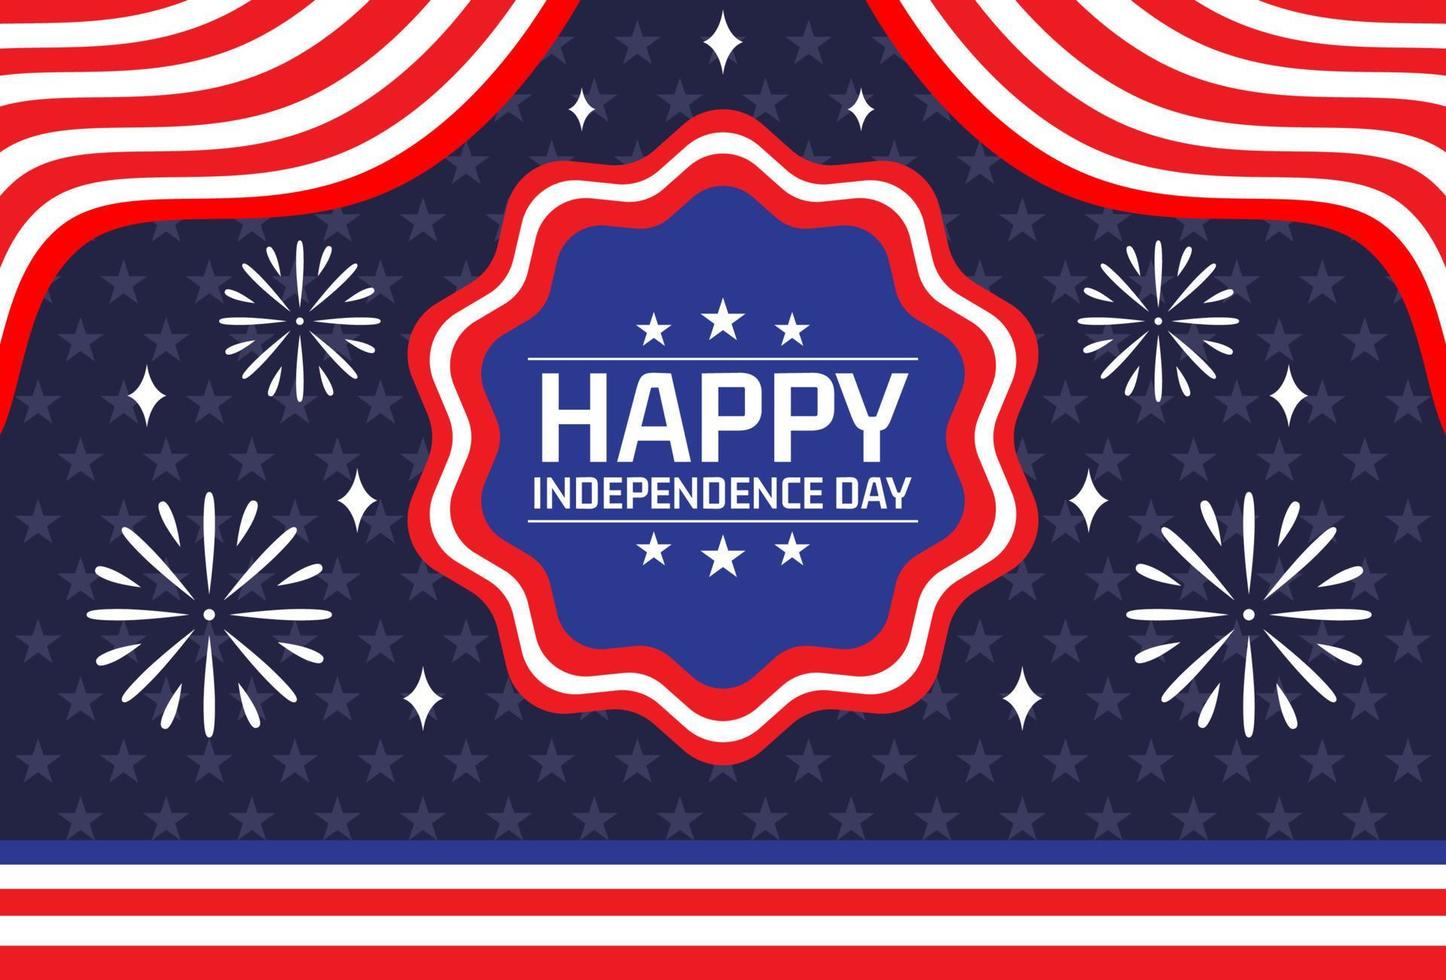 United States independence greeting design with flag and fireworks decoration. vector